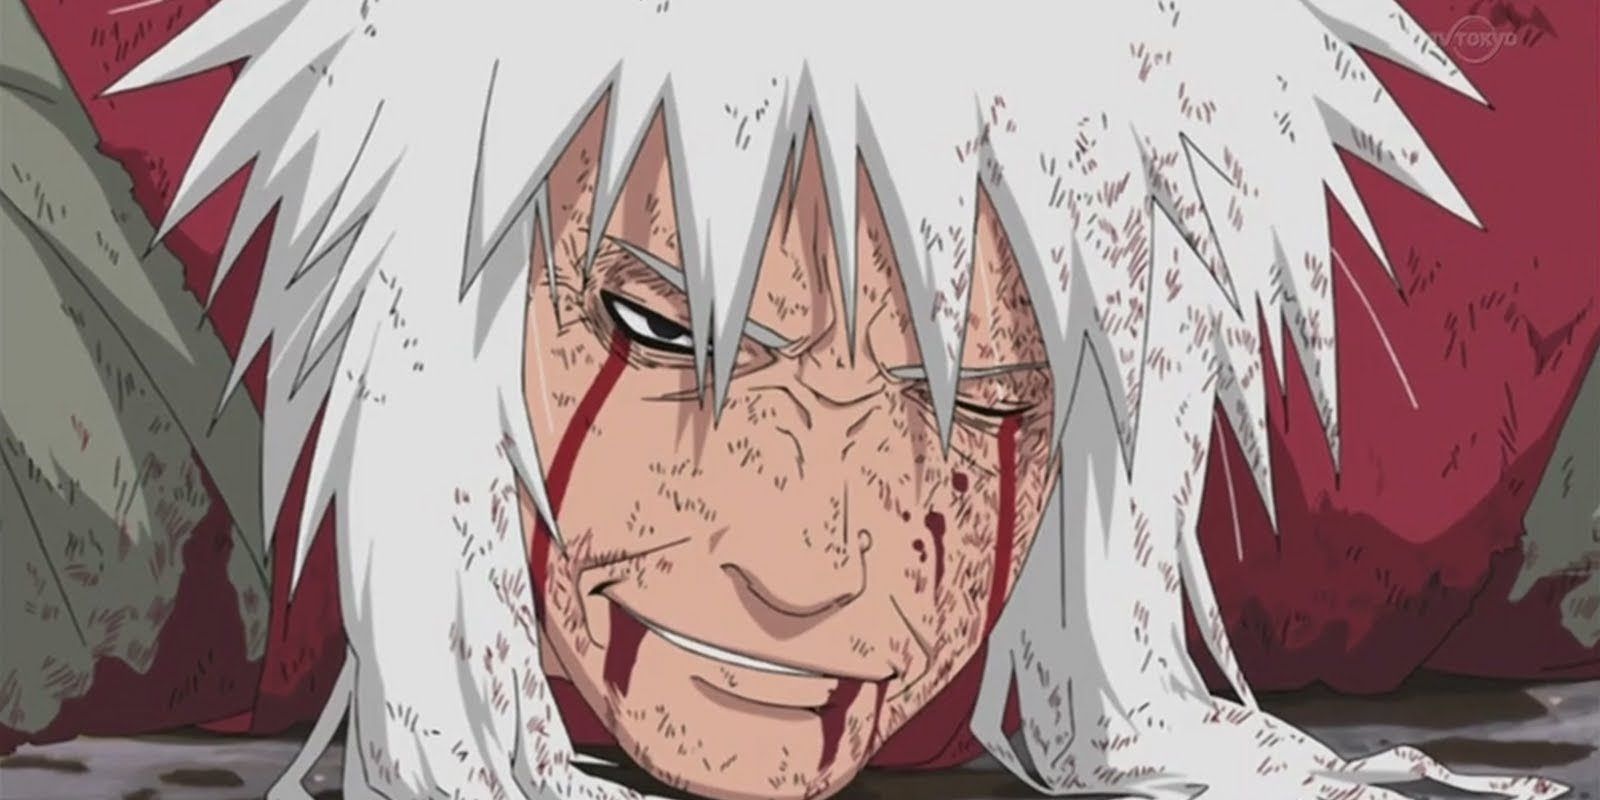 Jiraiya smiles with blood trickling from his mouth in Naruto Shippuden.